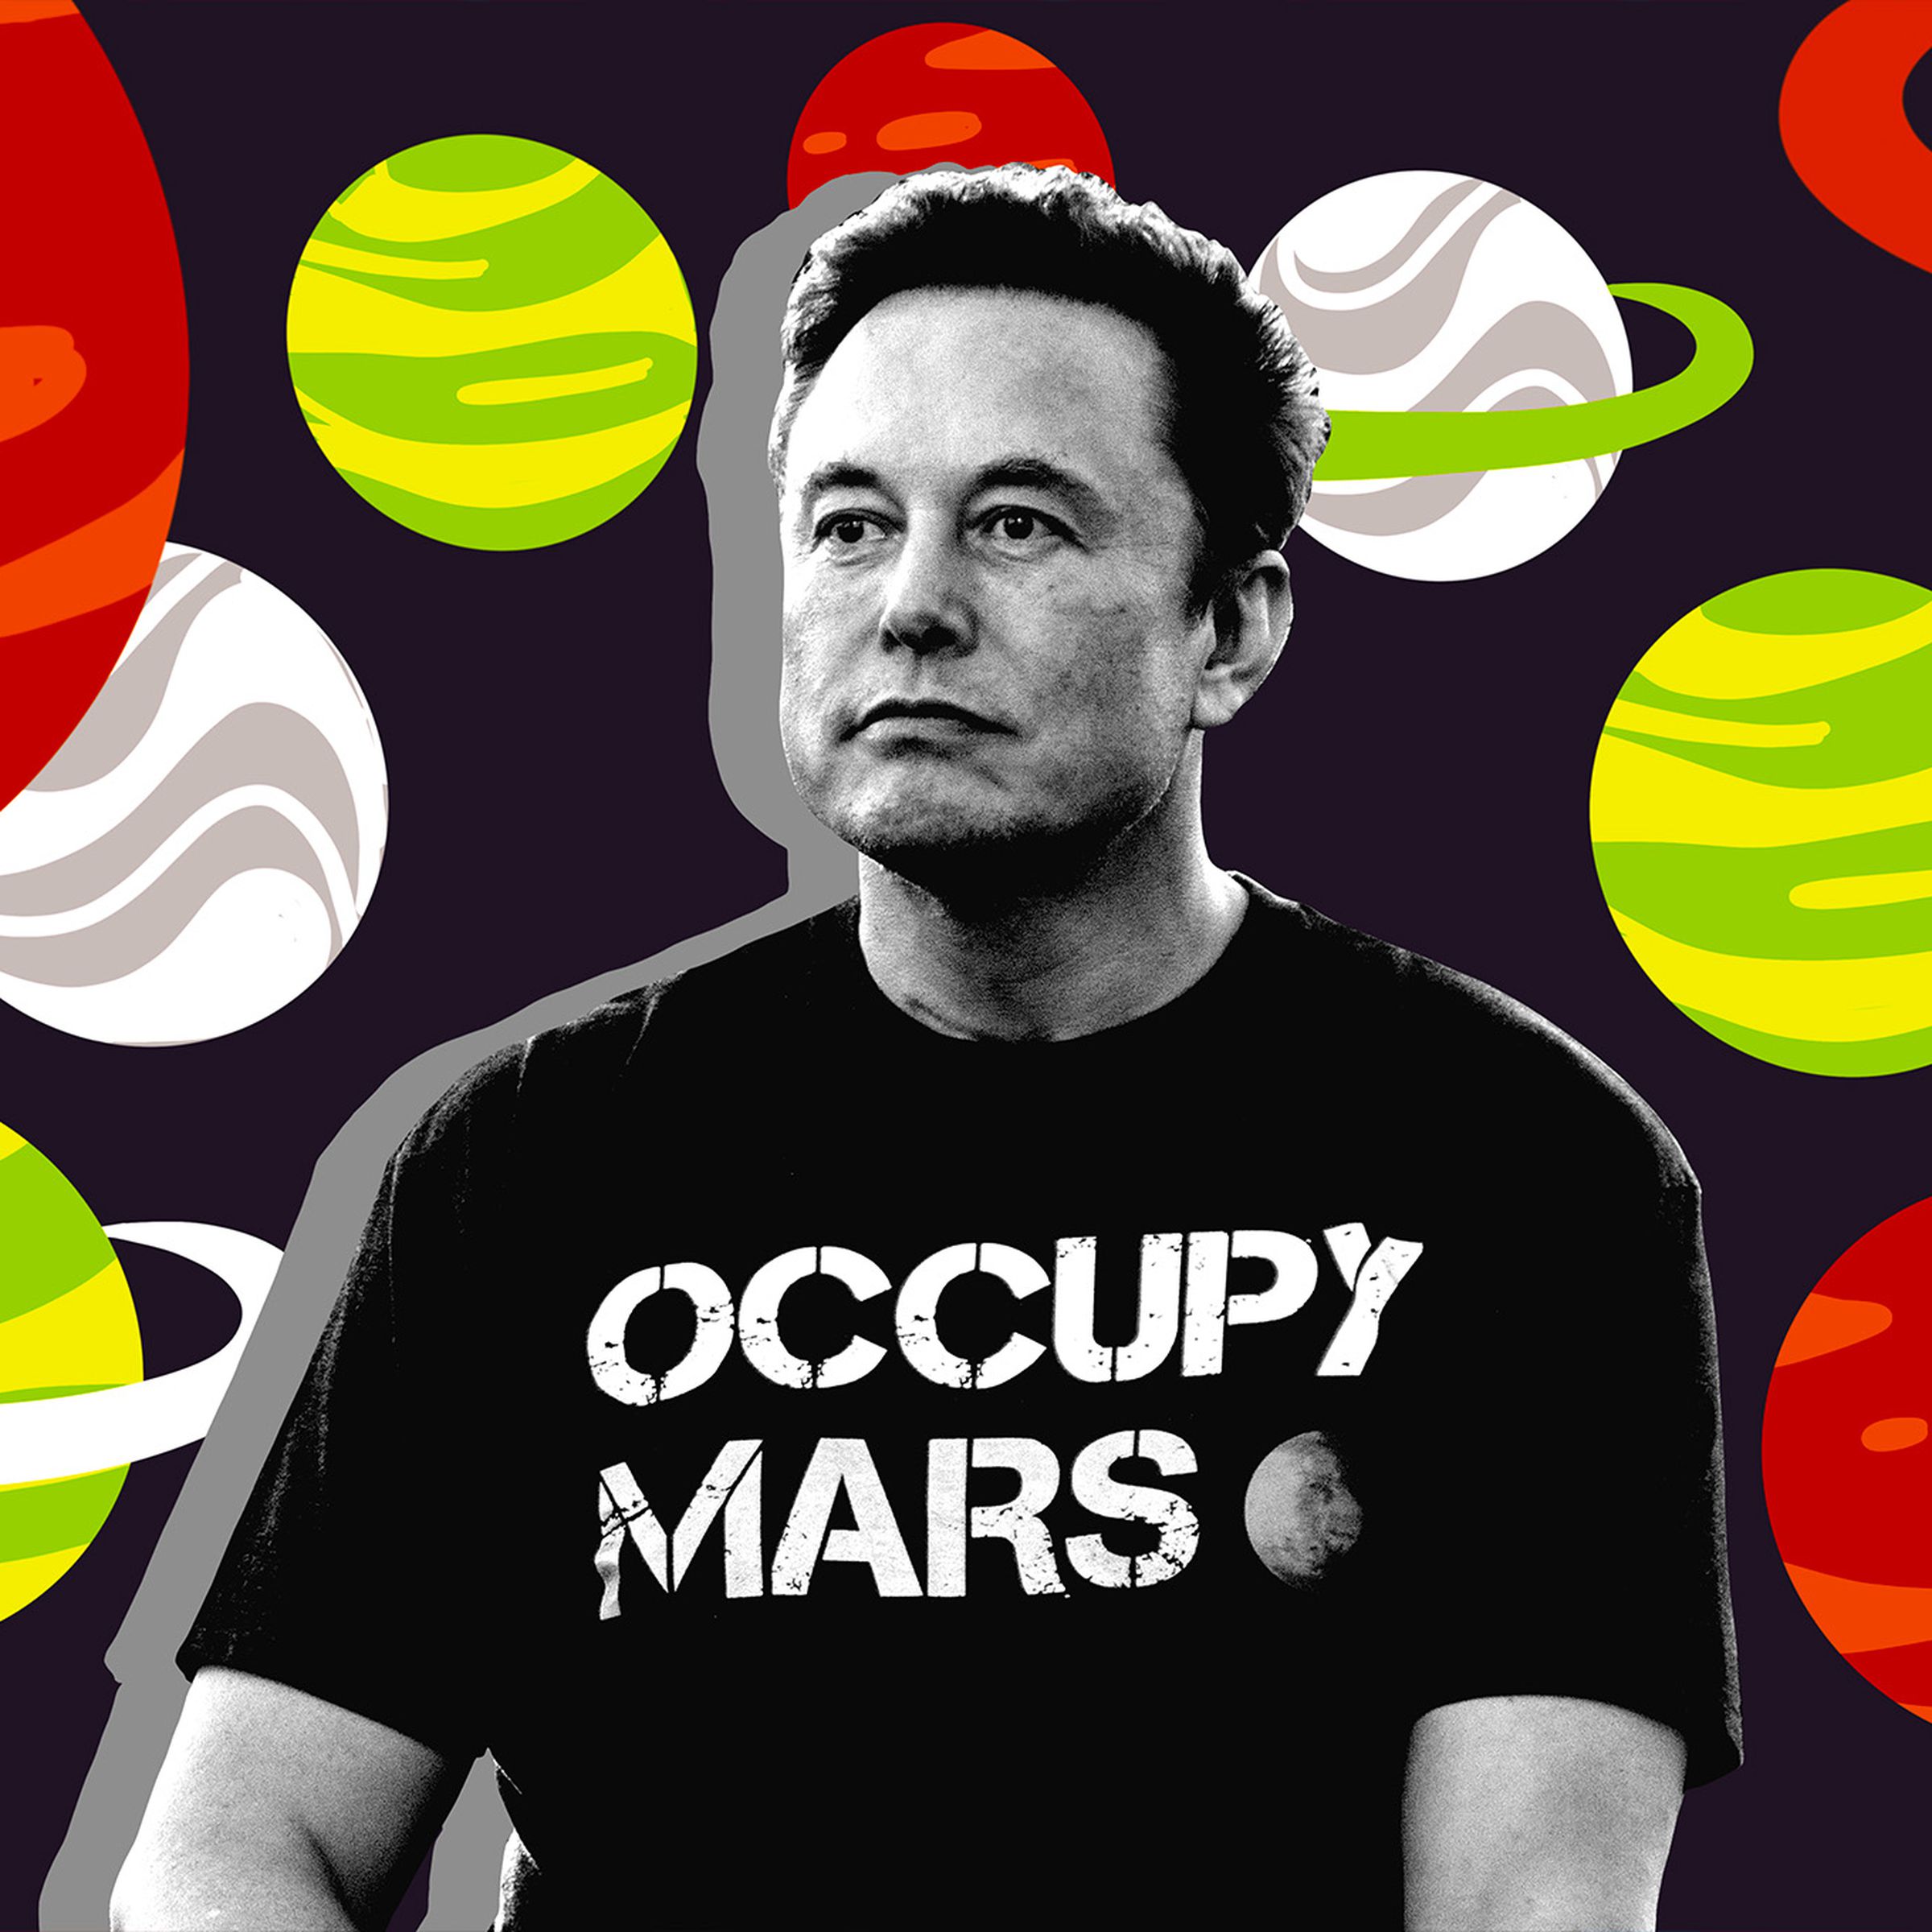 An image showing Elon Musk with illustrations of planets behind him